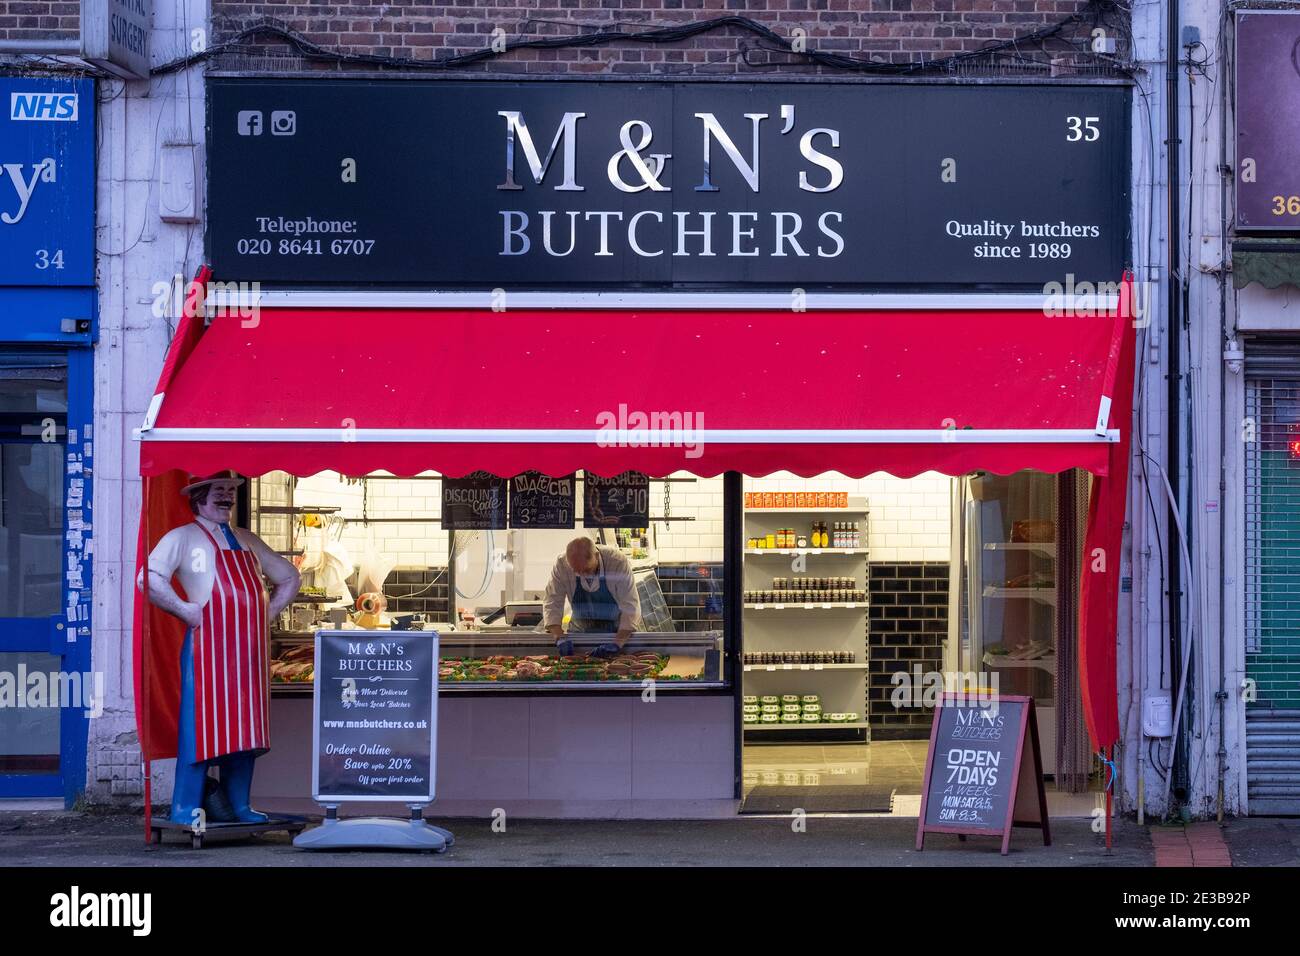 Sutton, Surrey, UK. 18 January 2021. A local butcher prepares his window display in the early morning. During the current lockdown he is open and trading 7 days a week as an exempt occupation. Credit: Malcolm Park/Alamy Live News. Stock Photo